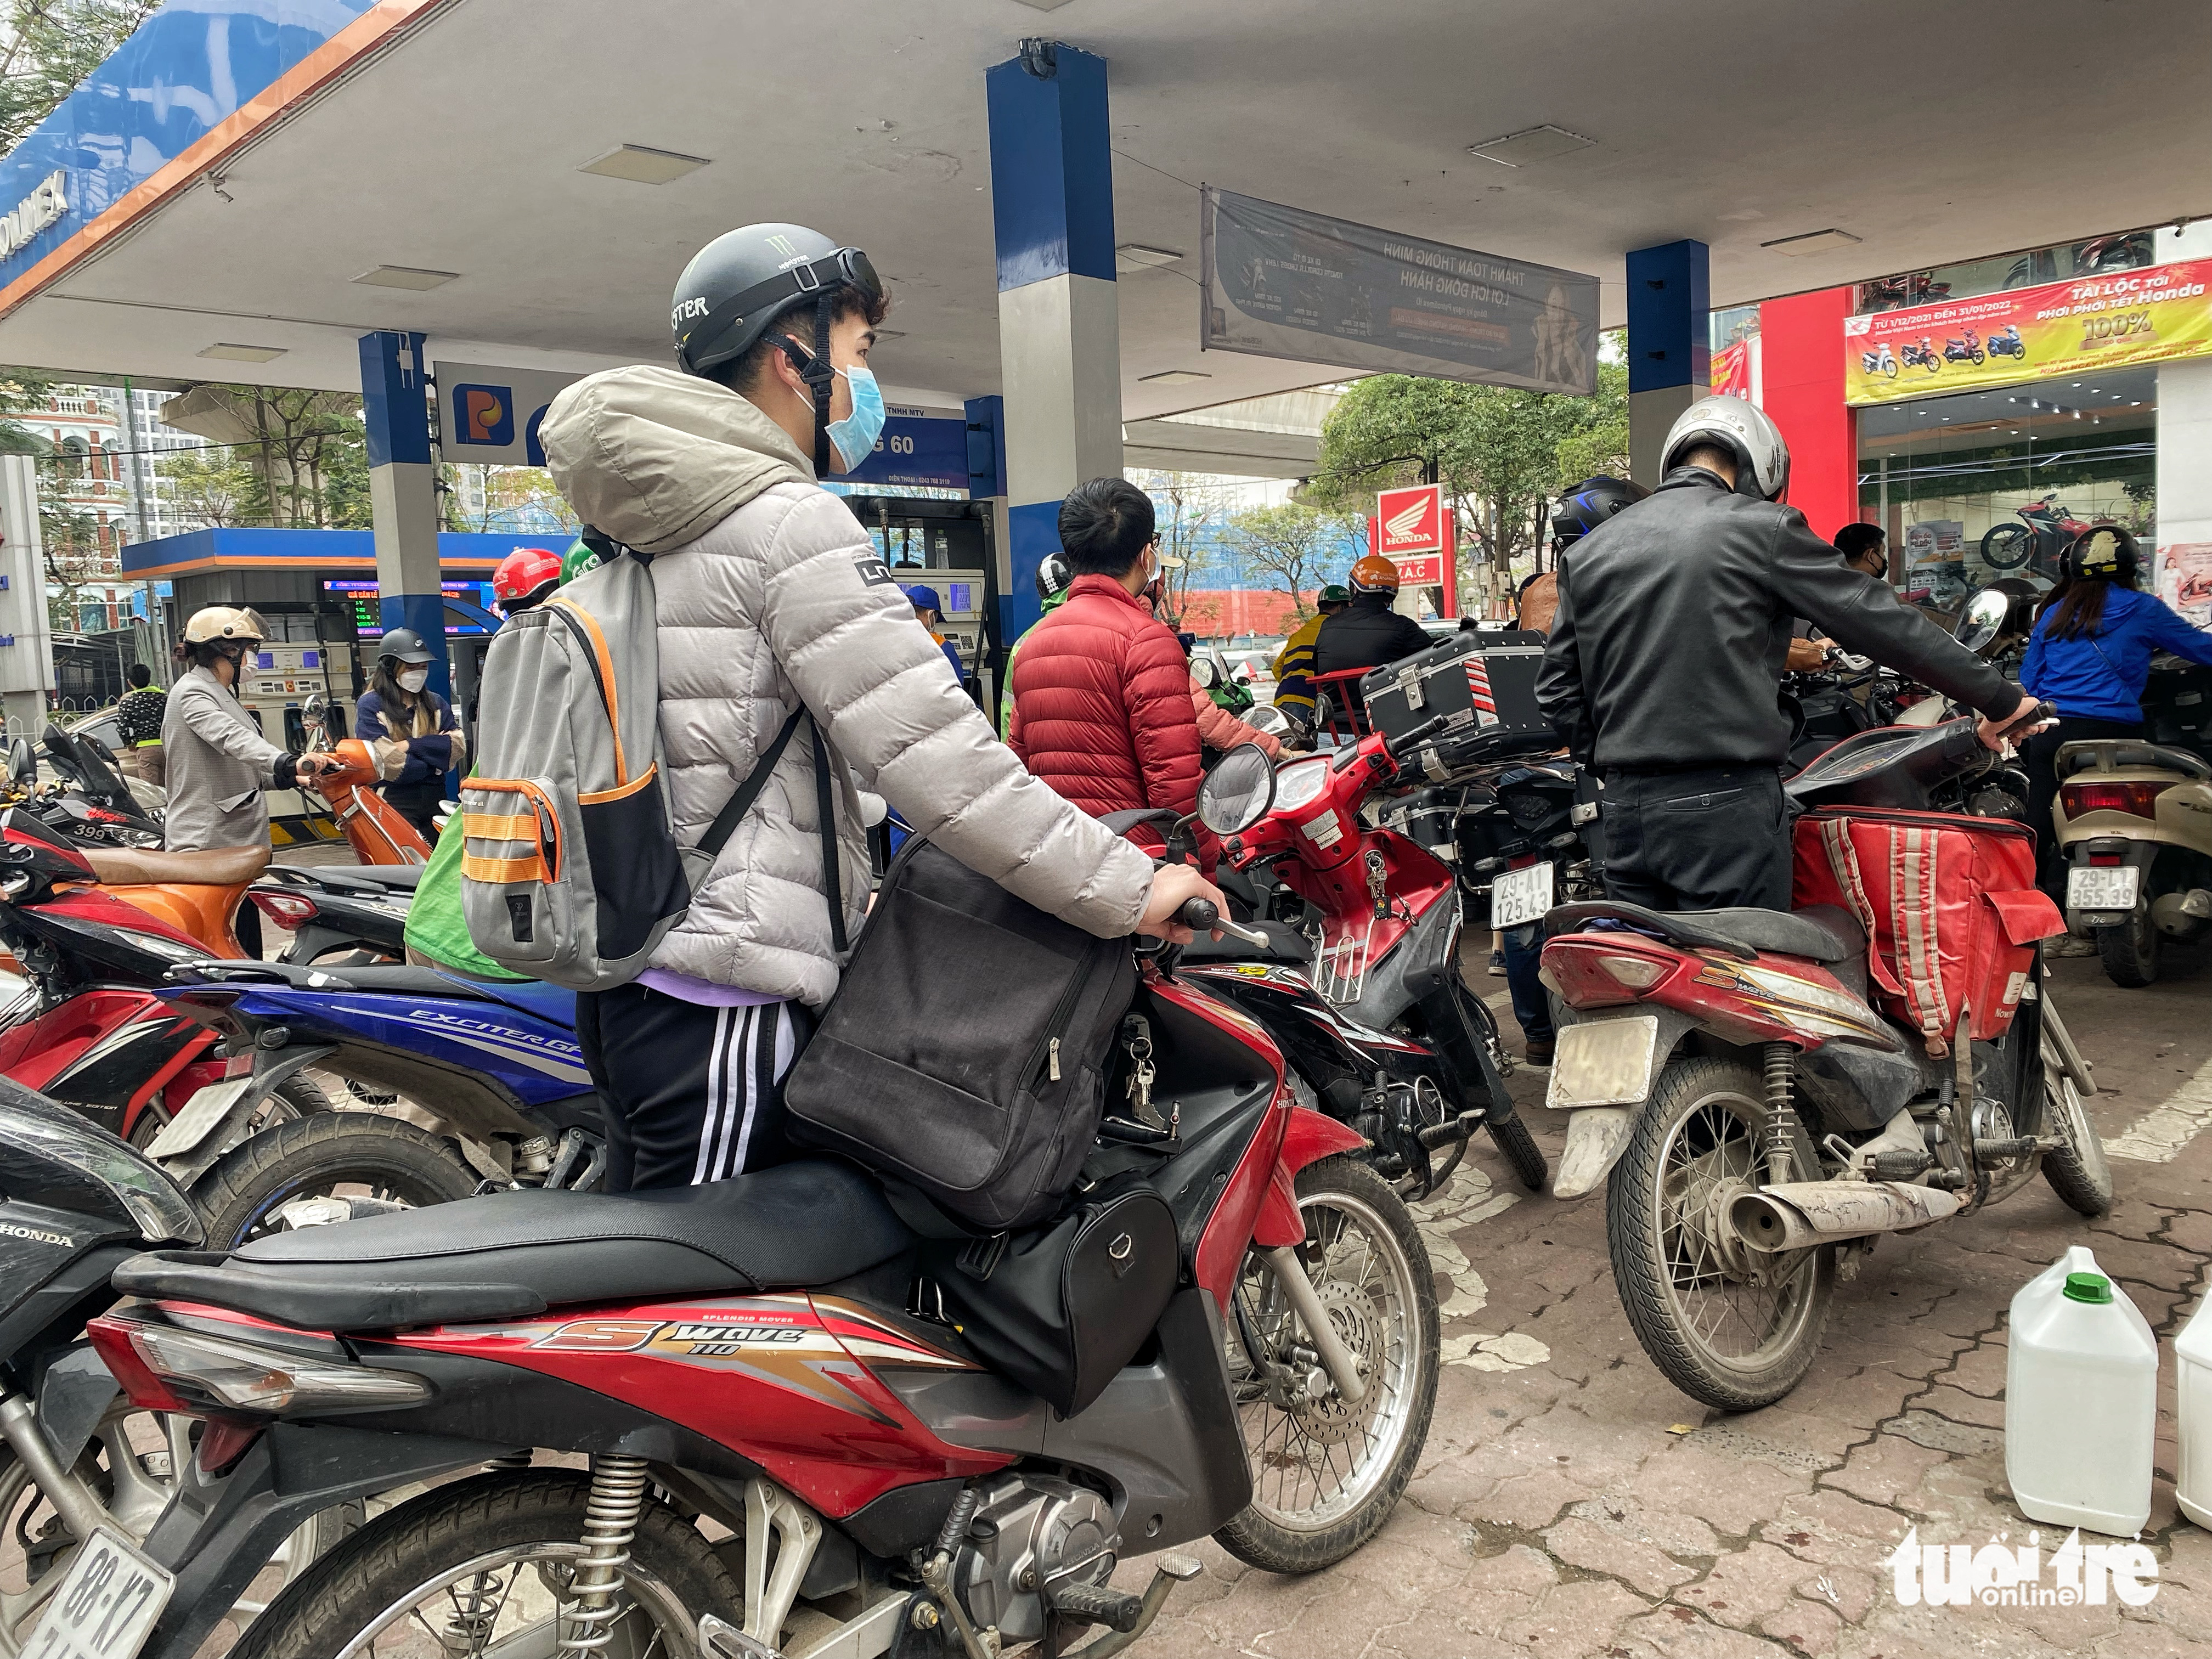 People wait for their turn to buy gasoline at a filling station in Cau Giay District, Hanoi, March 11, 2022. Photo: Pham Tuan / Tuoi Tre